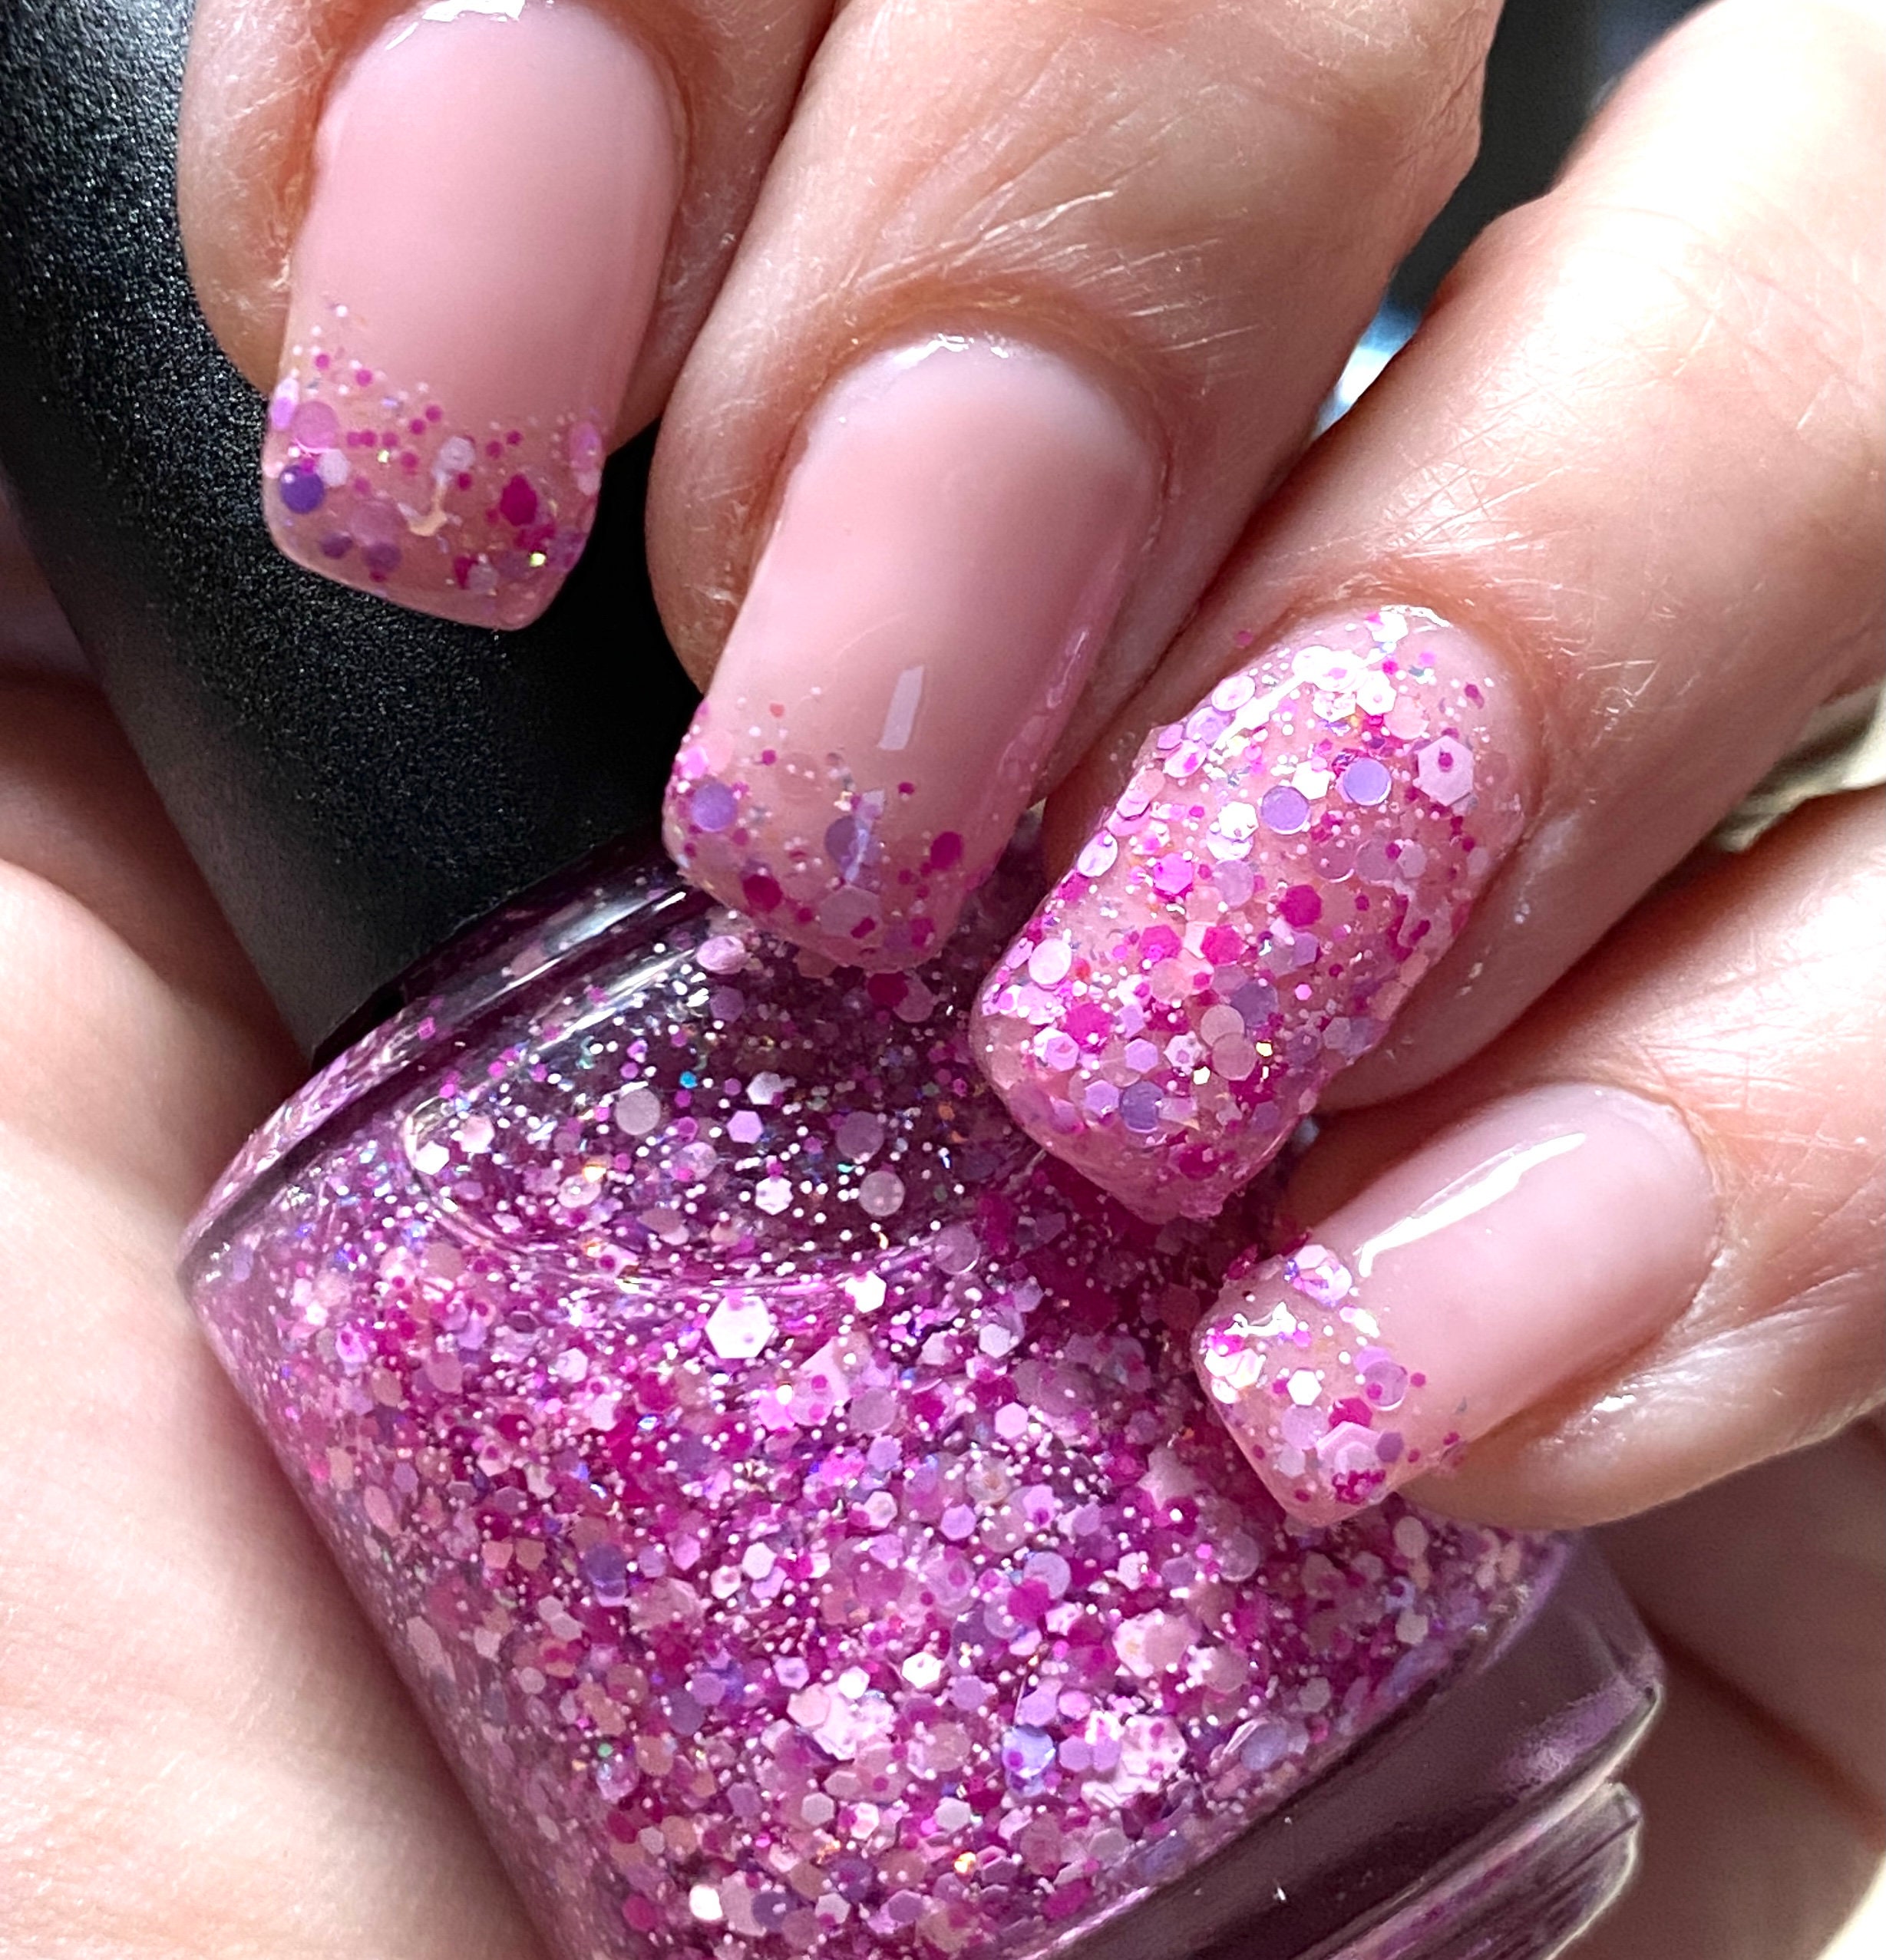 GLITTIES - Blooming Orchid - Chunky Glitter Mix - Great for Nail